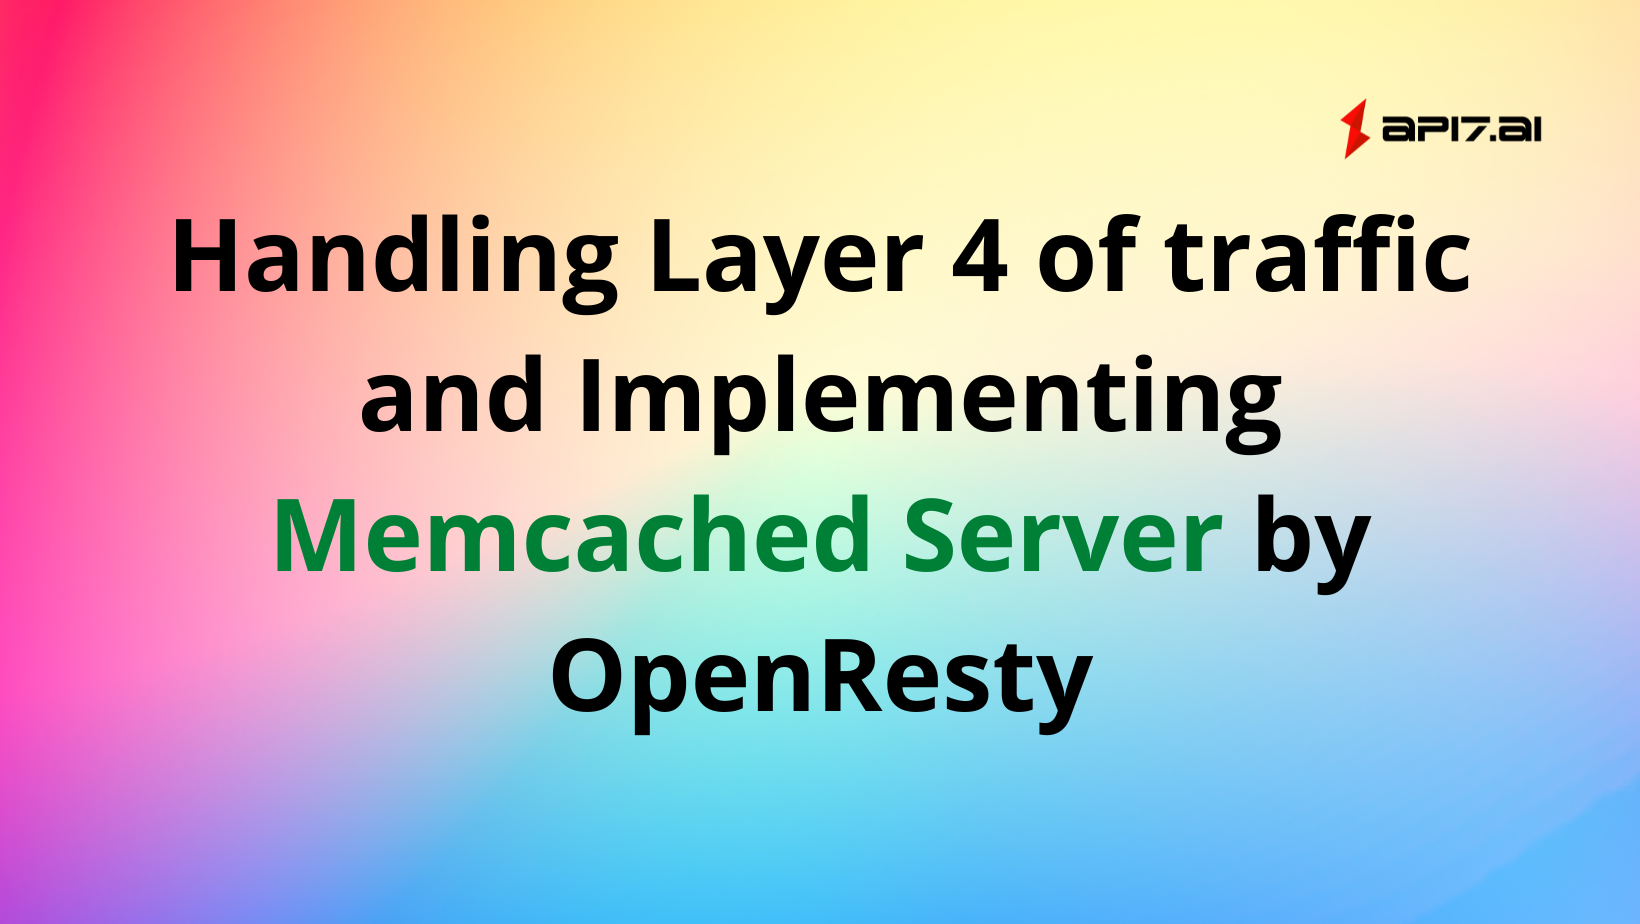 Handling Layer 4 of traffic and Implementing Memcached Server by OpenResty